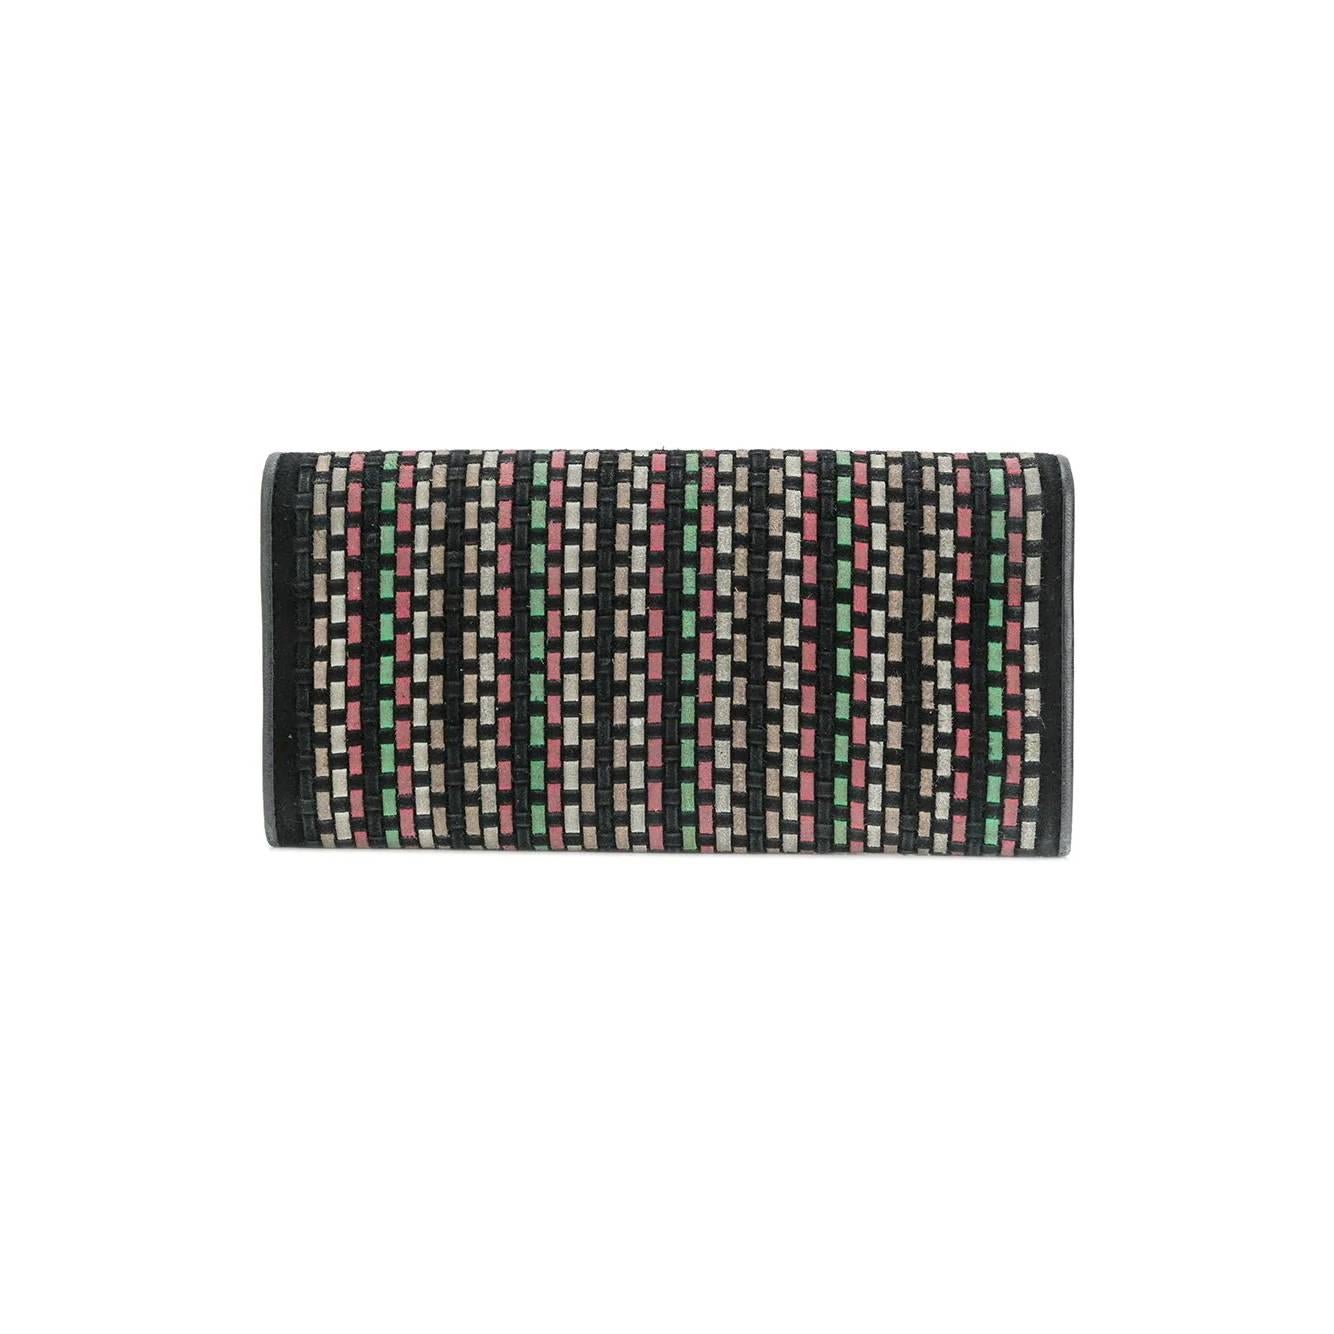 Missoni black, white, pink and green suede wallet. External embossed geometric design. Frontal flap with hidden button. Leather and logoed fabric interior lining: 6 card holders, coin holder pocket with logoed zip, 5 more open pockets.

The item